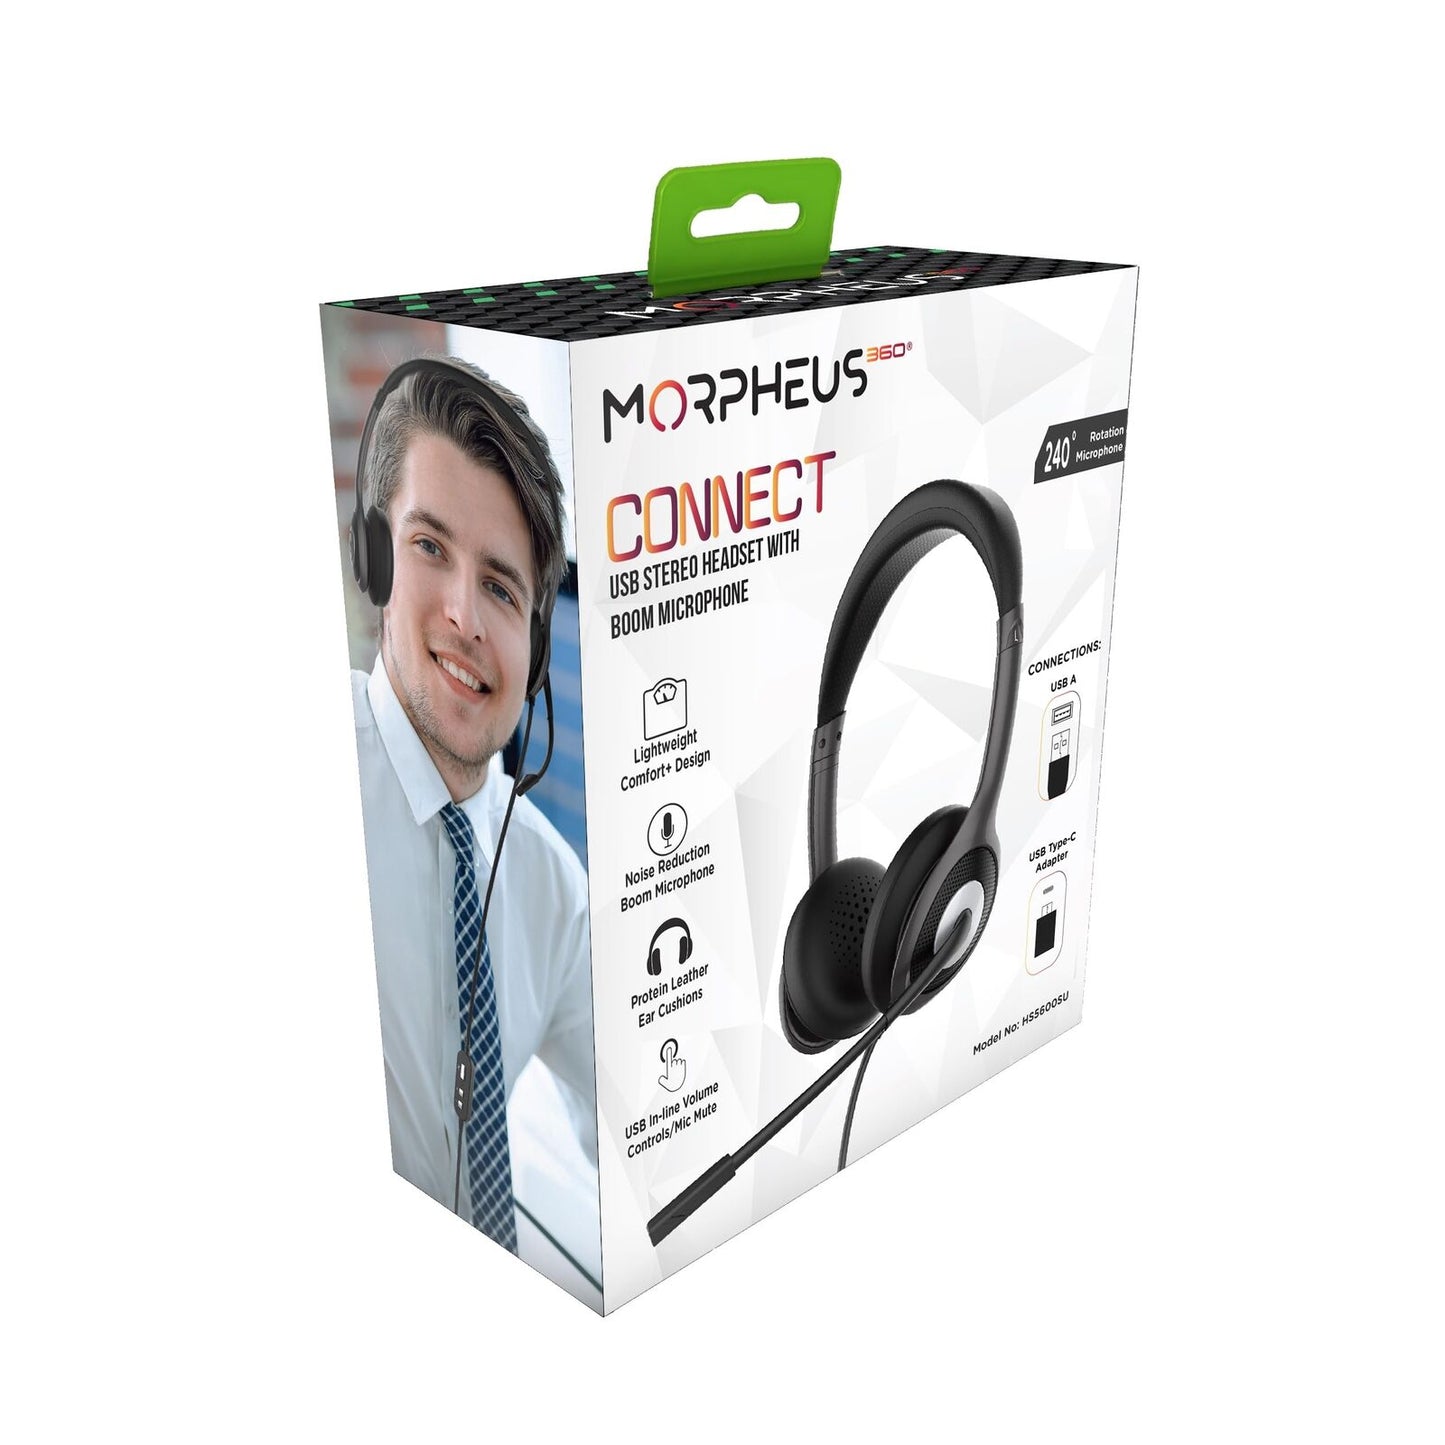 Morpheus 360 Connect USB Stereo Headset with Boom Microphone - Noise Reduction